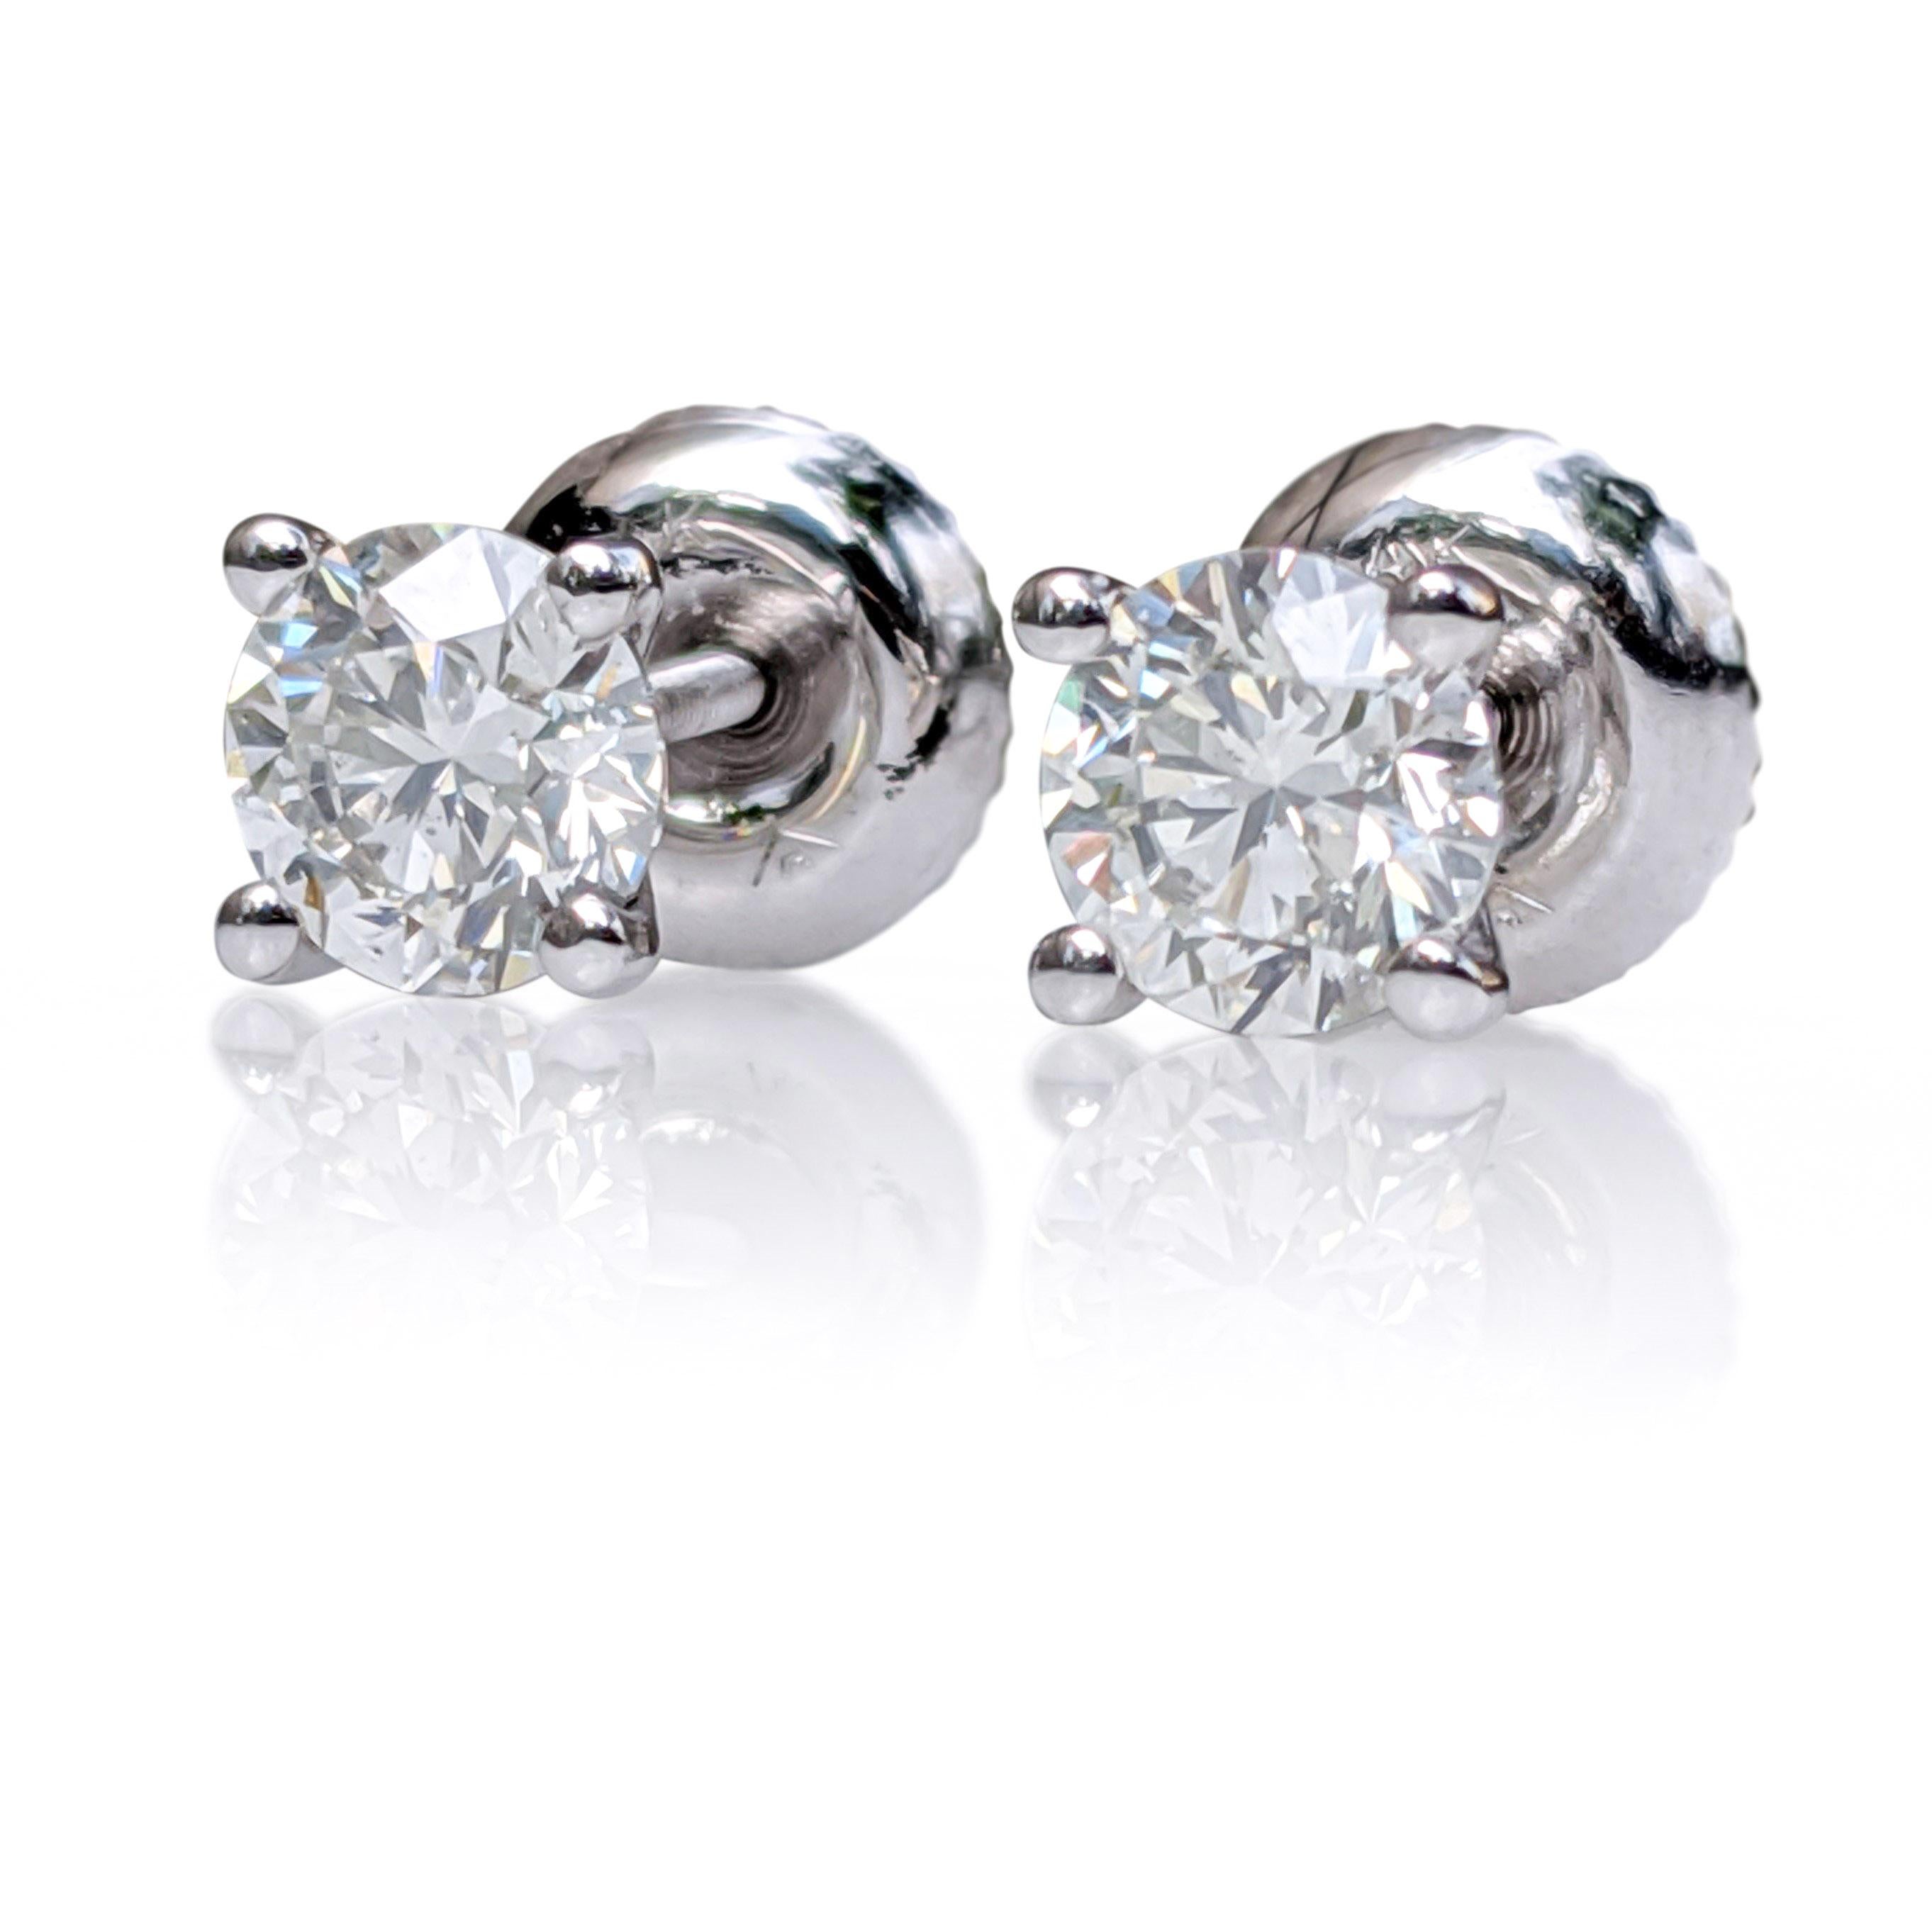 Round Cut NO RESERVE! 1.00 Carat Diamond - 14 kt. White gold - Earrings For Sale